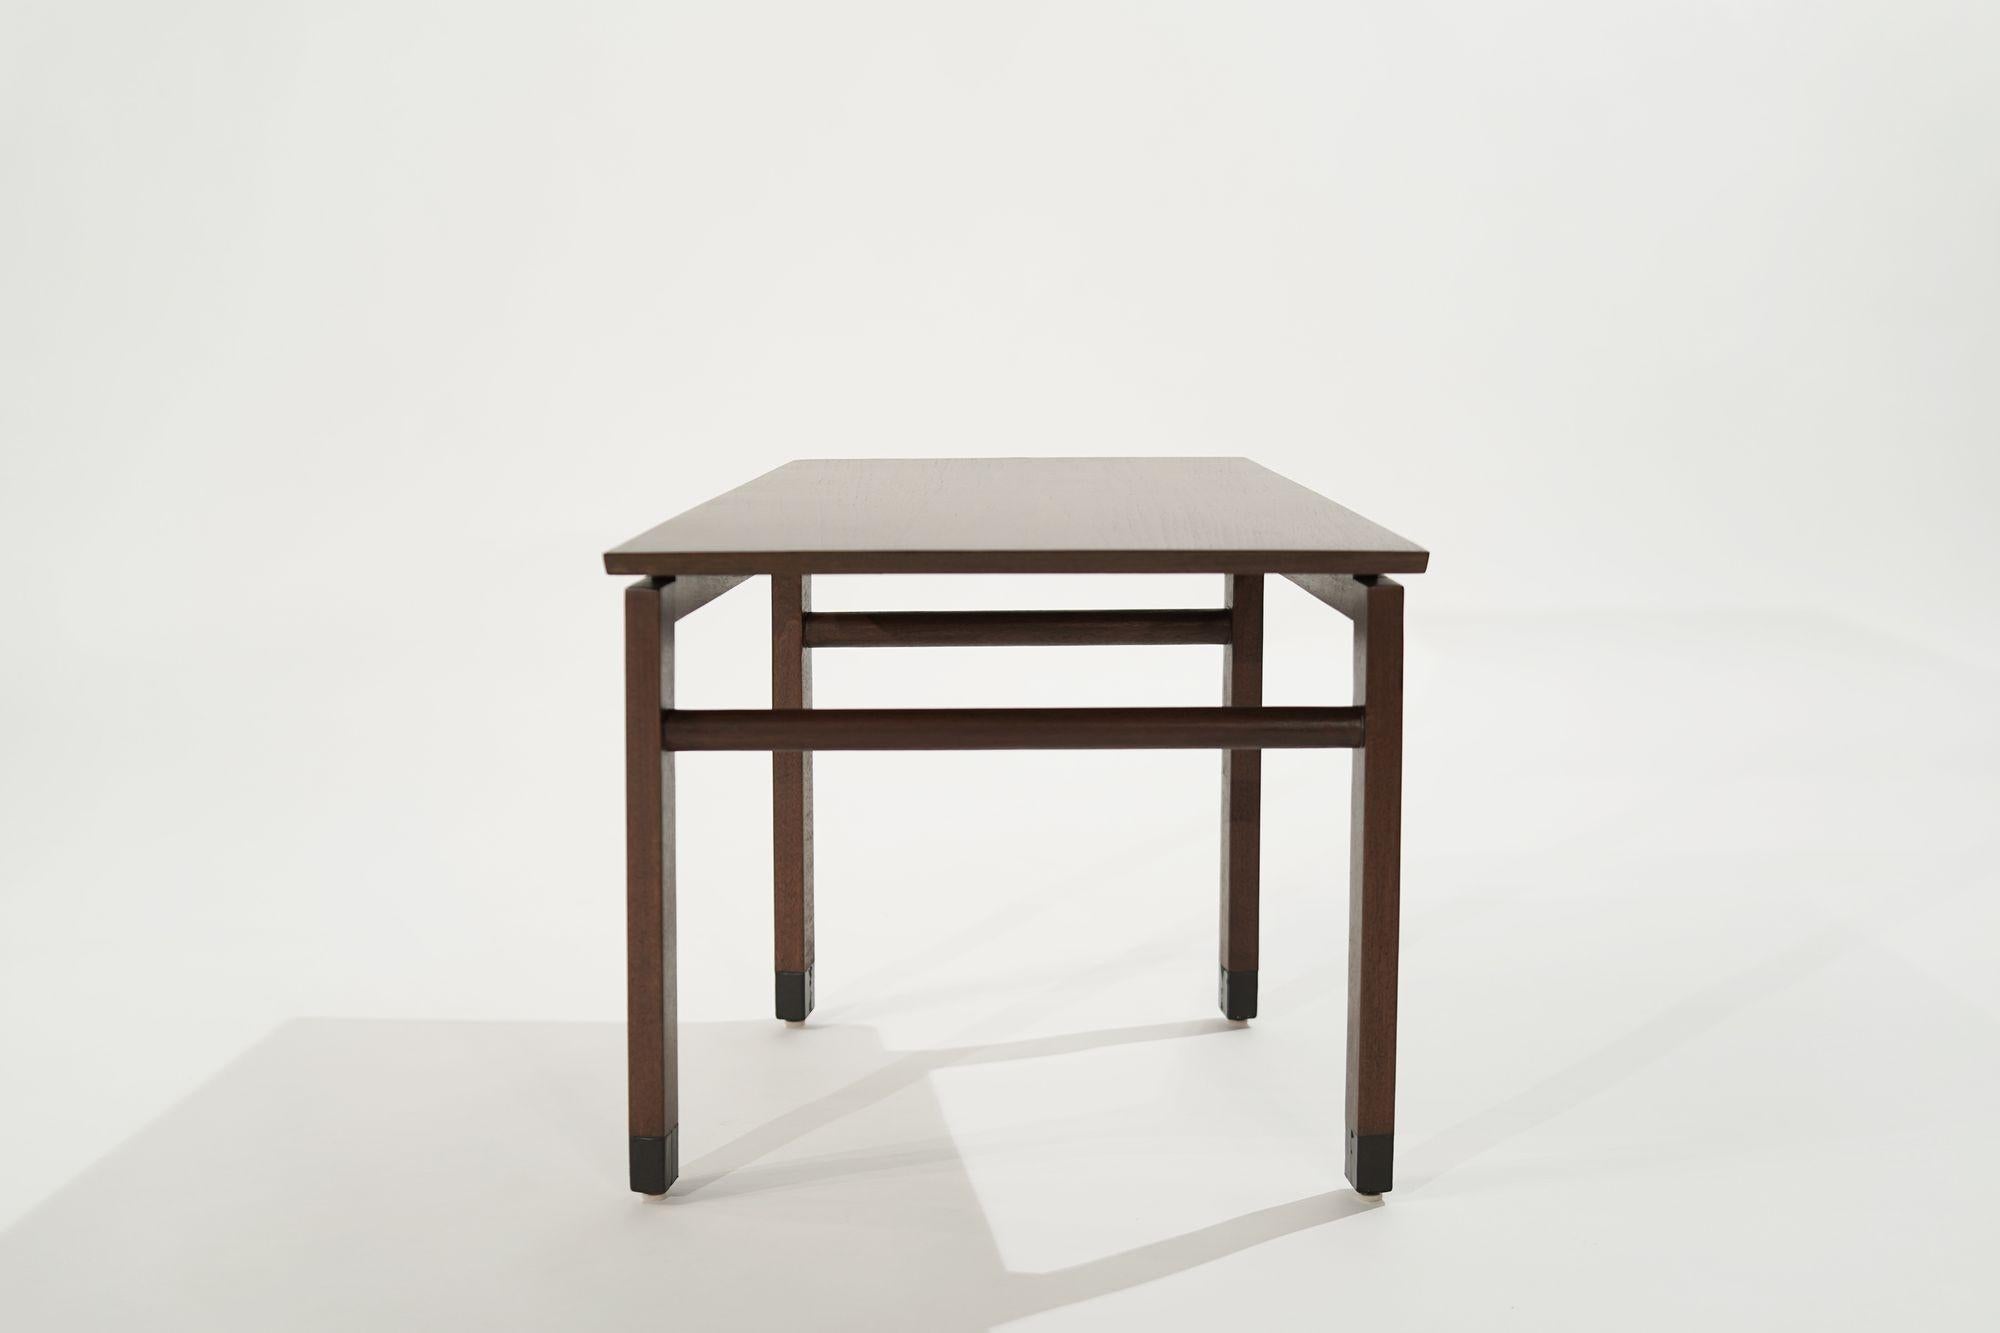 20th Century Occasional Wedge Table by Edward Wormley for Dunbar, C. 1950s For Sale